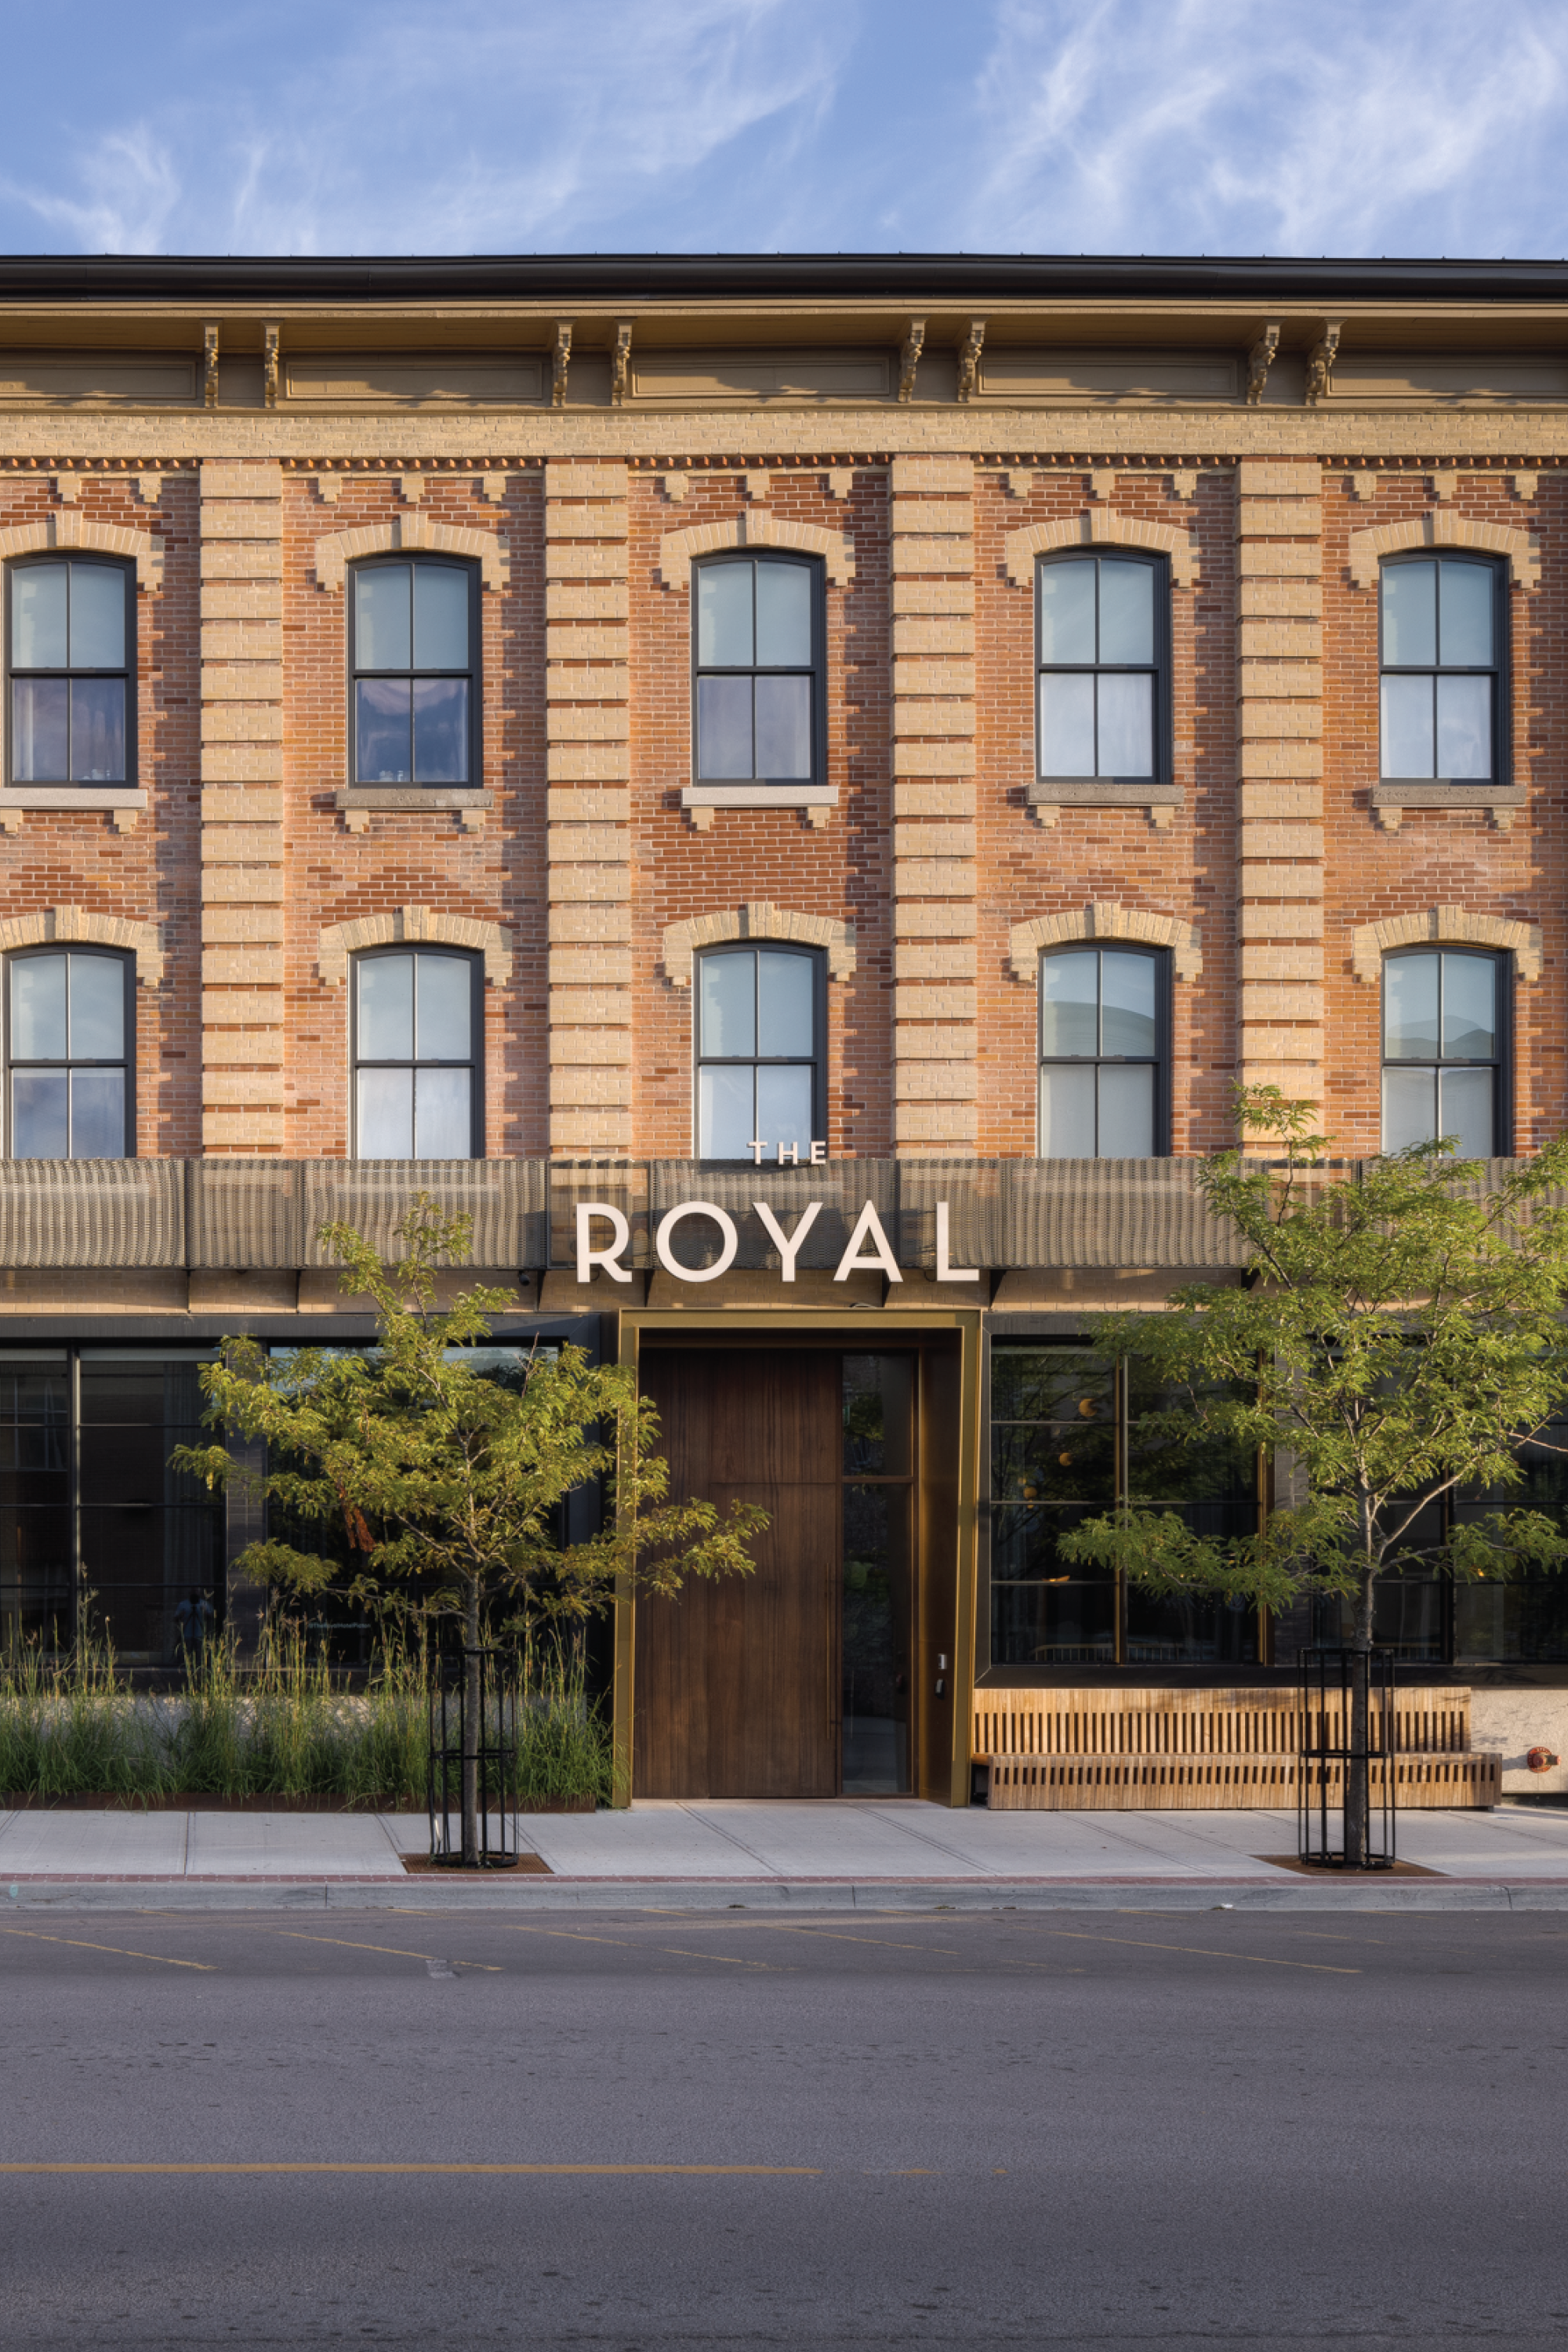 The Royal Hotel front facade during the day